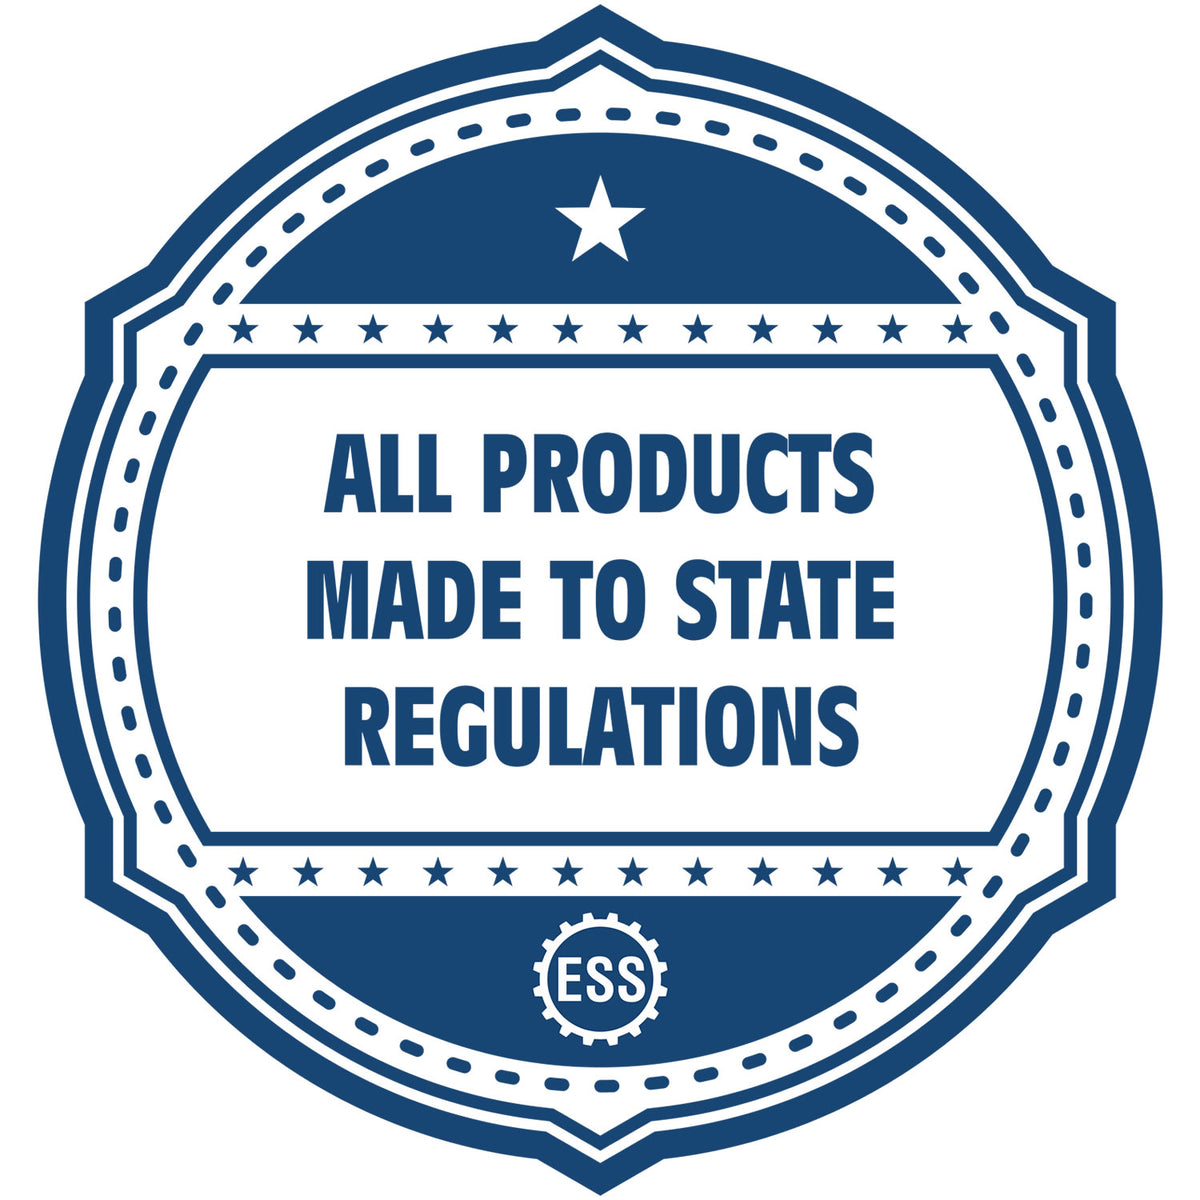 A blue icon or badge for the Gift Maryland Architect Seal showing that this product is made in compliance with state regulations.